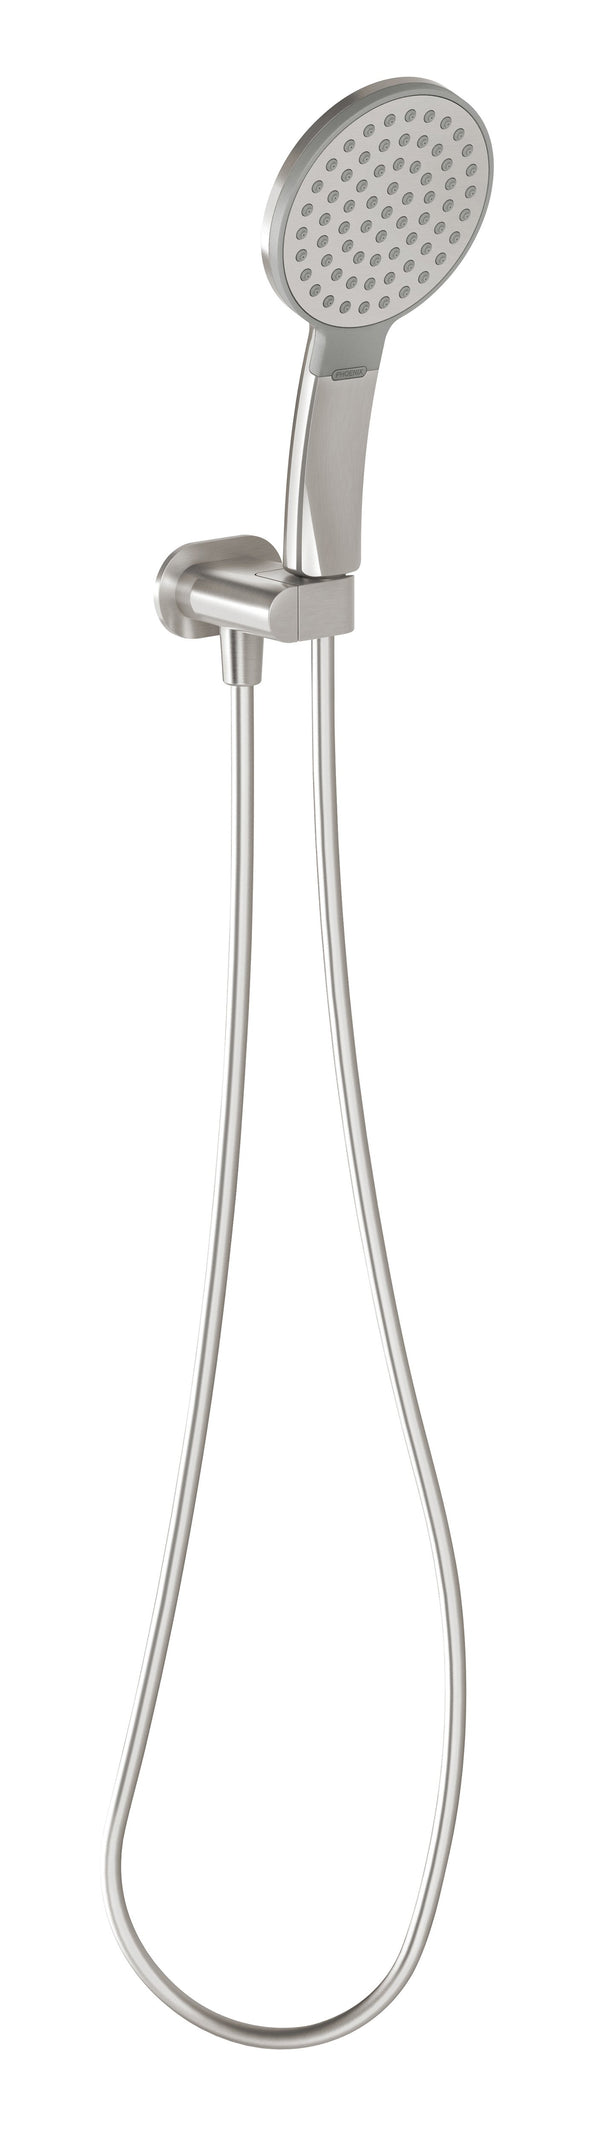 NX QUIL HAND SHOWER (Brushed Nickel)